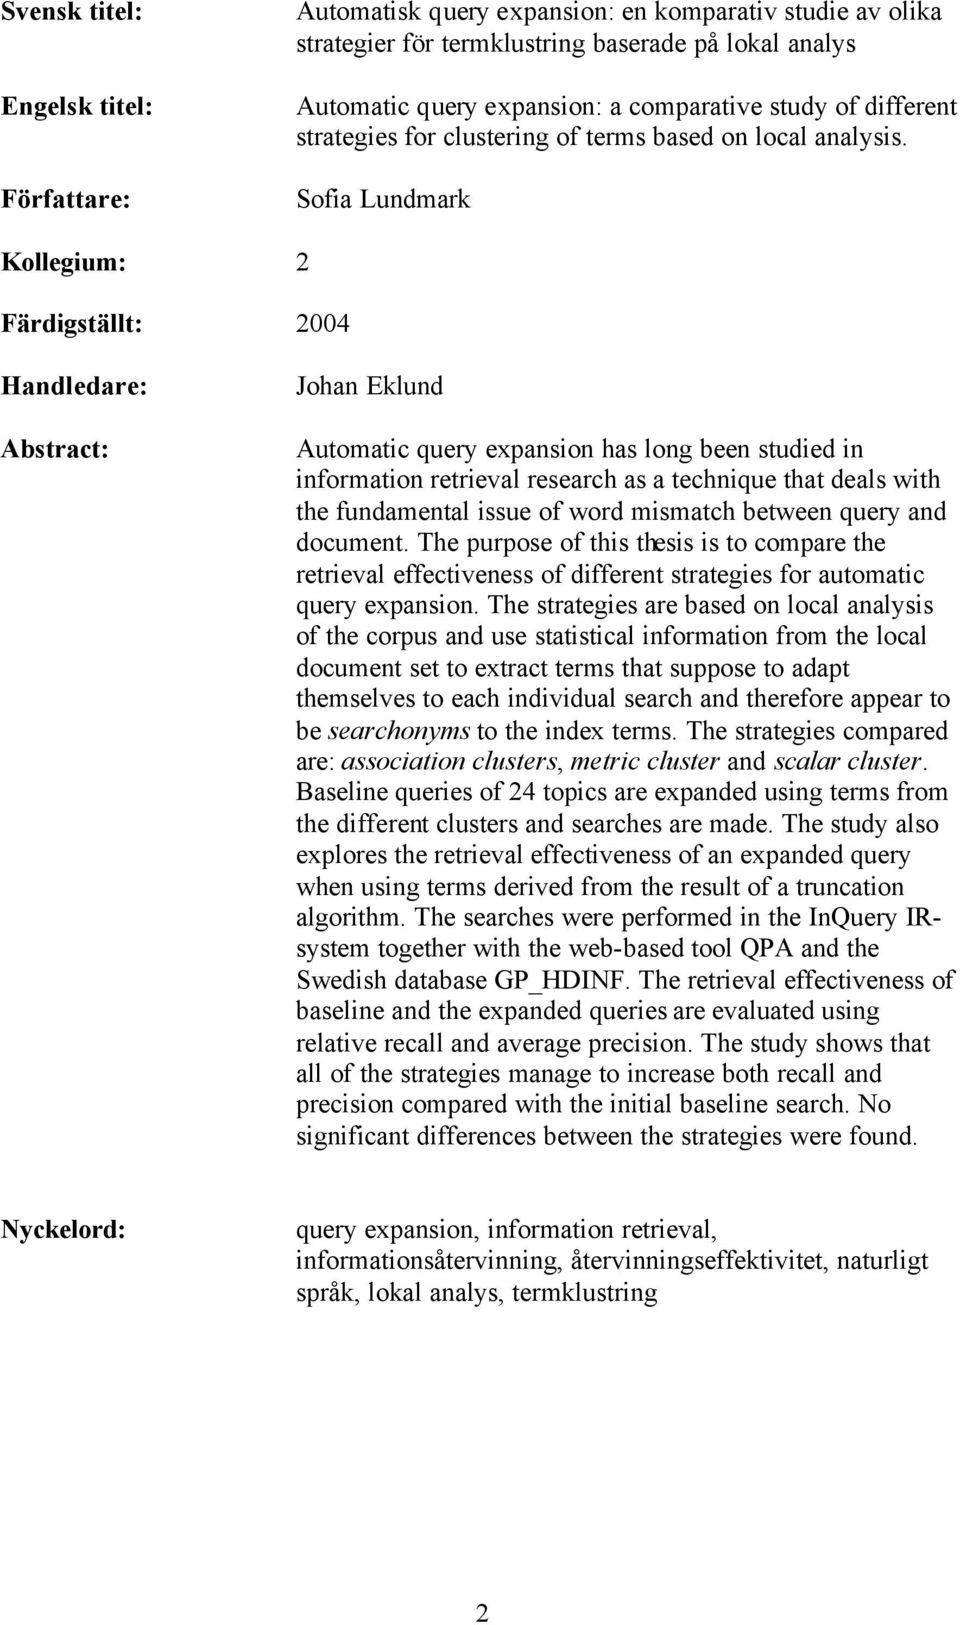 Sofia Lundmark Kollegium: 2 Färdigställt: 2004 Handledare: Abstract: Johan Eklund Automatic query expansion has long been studied in information retrieval research as a technique that deals with the